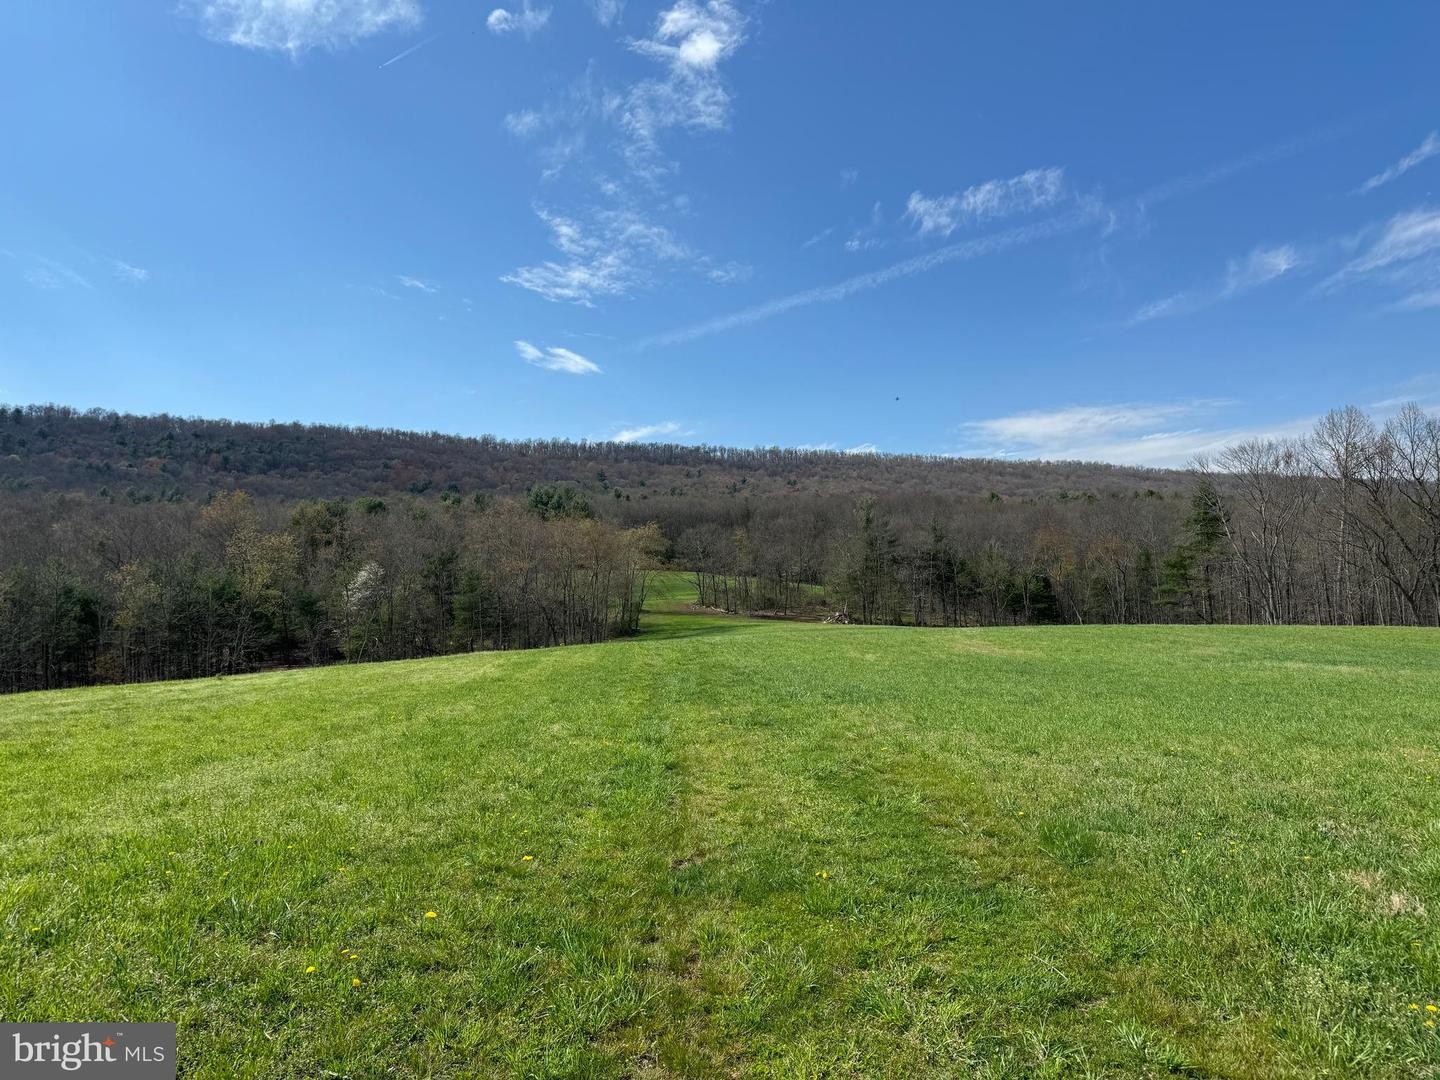 51. Tract 4: 17.48+/- Acres S Valley Rd